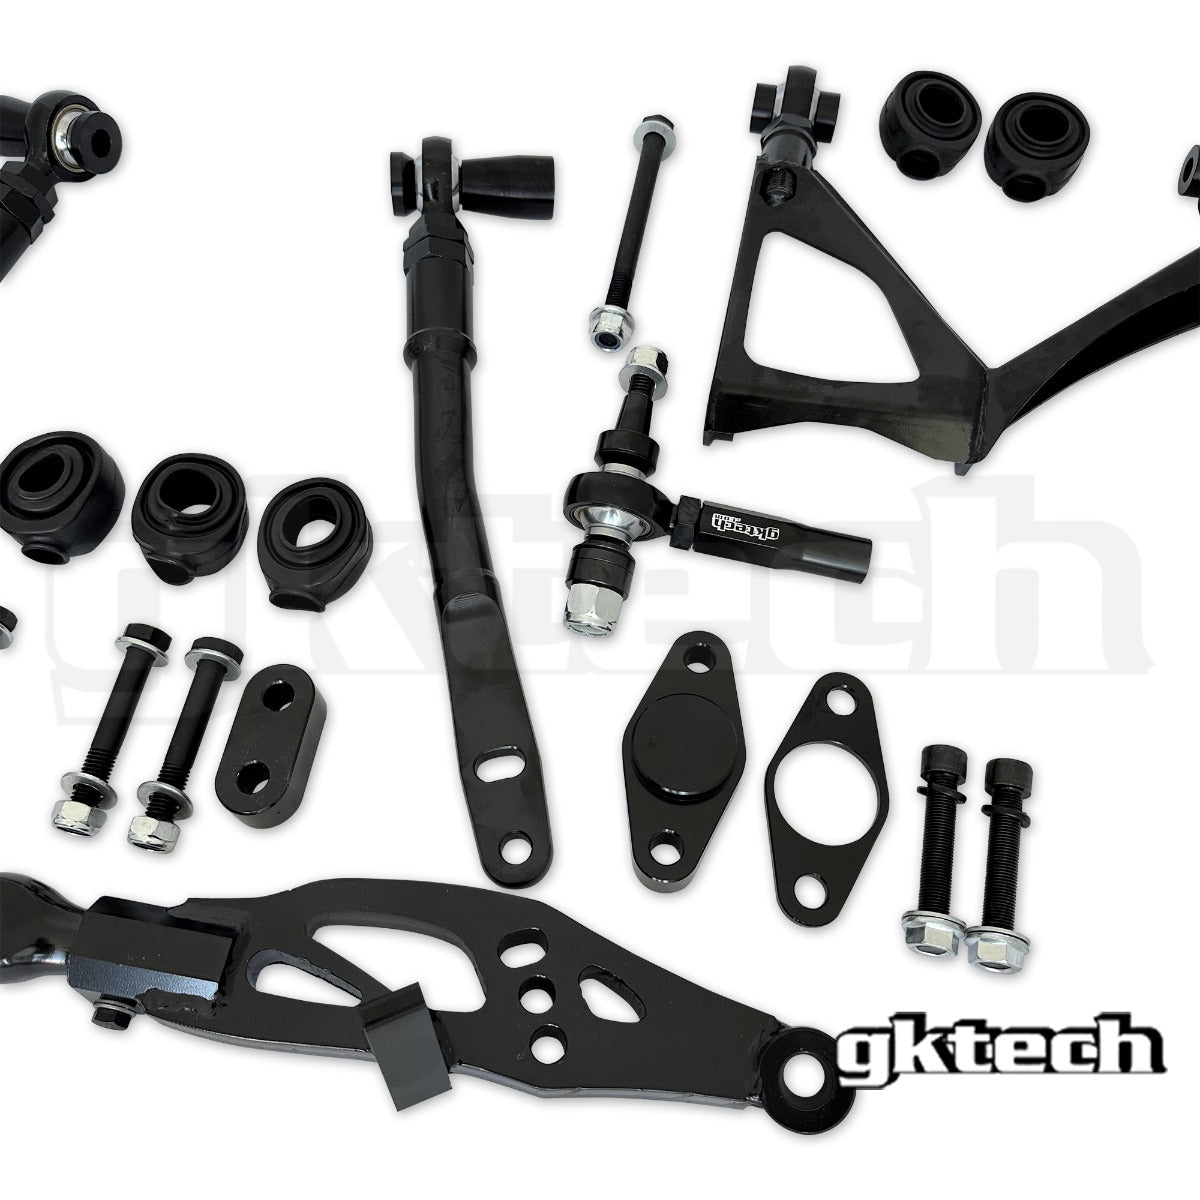 R33 GT-R / GTS4 Front Suspension arm package (10% combo discount)